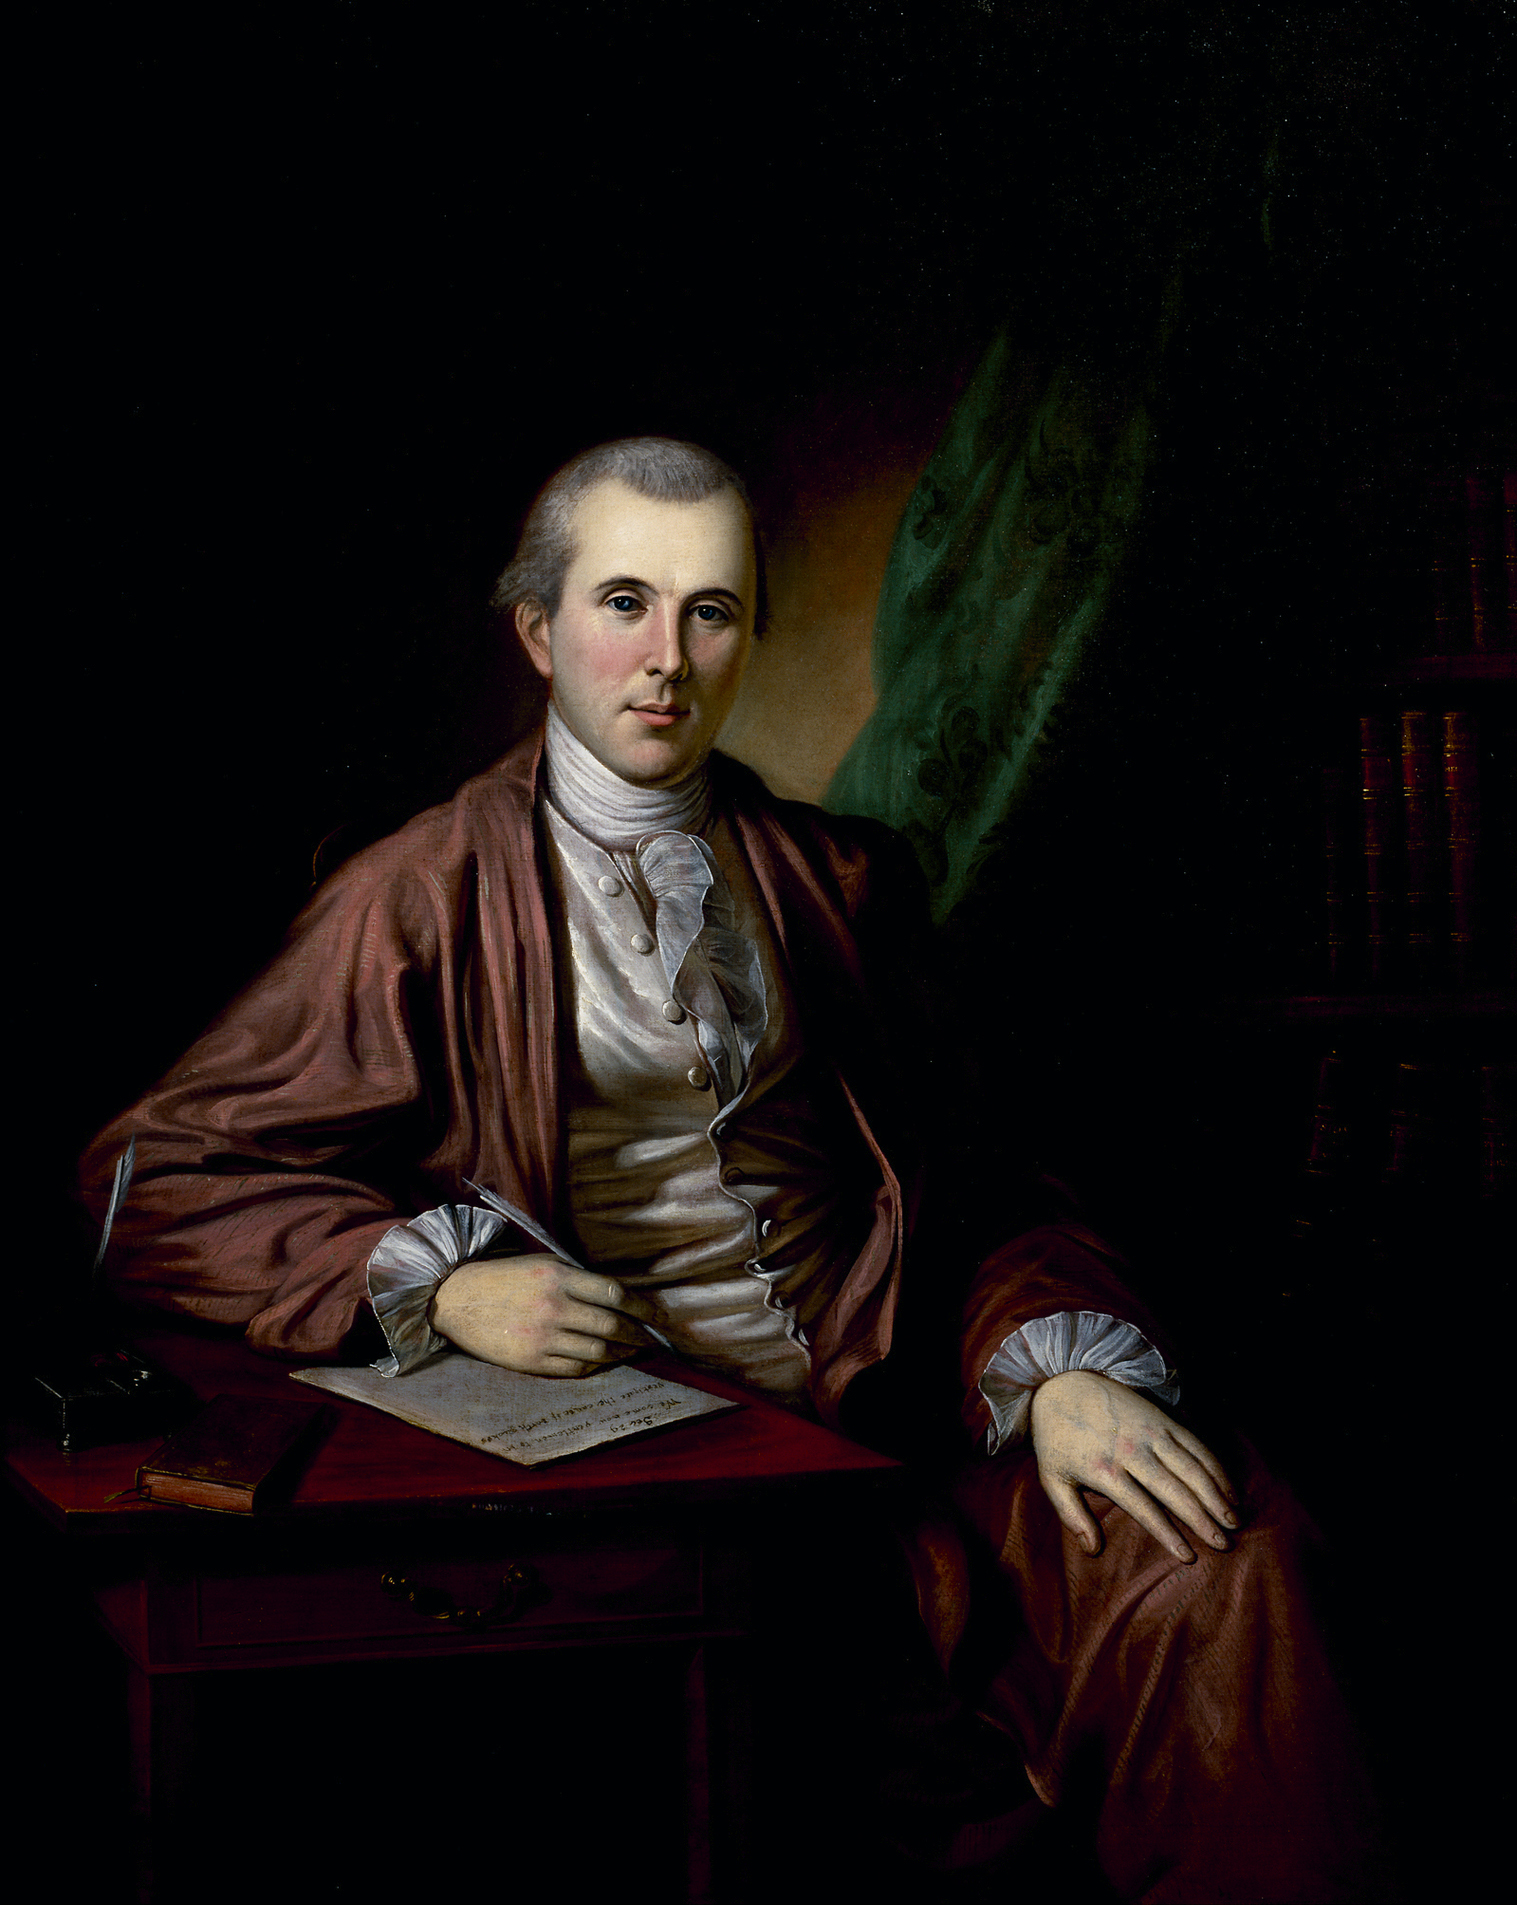 Benjamin Rush with a quill in his hand